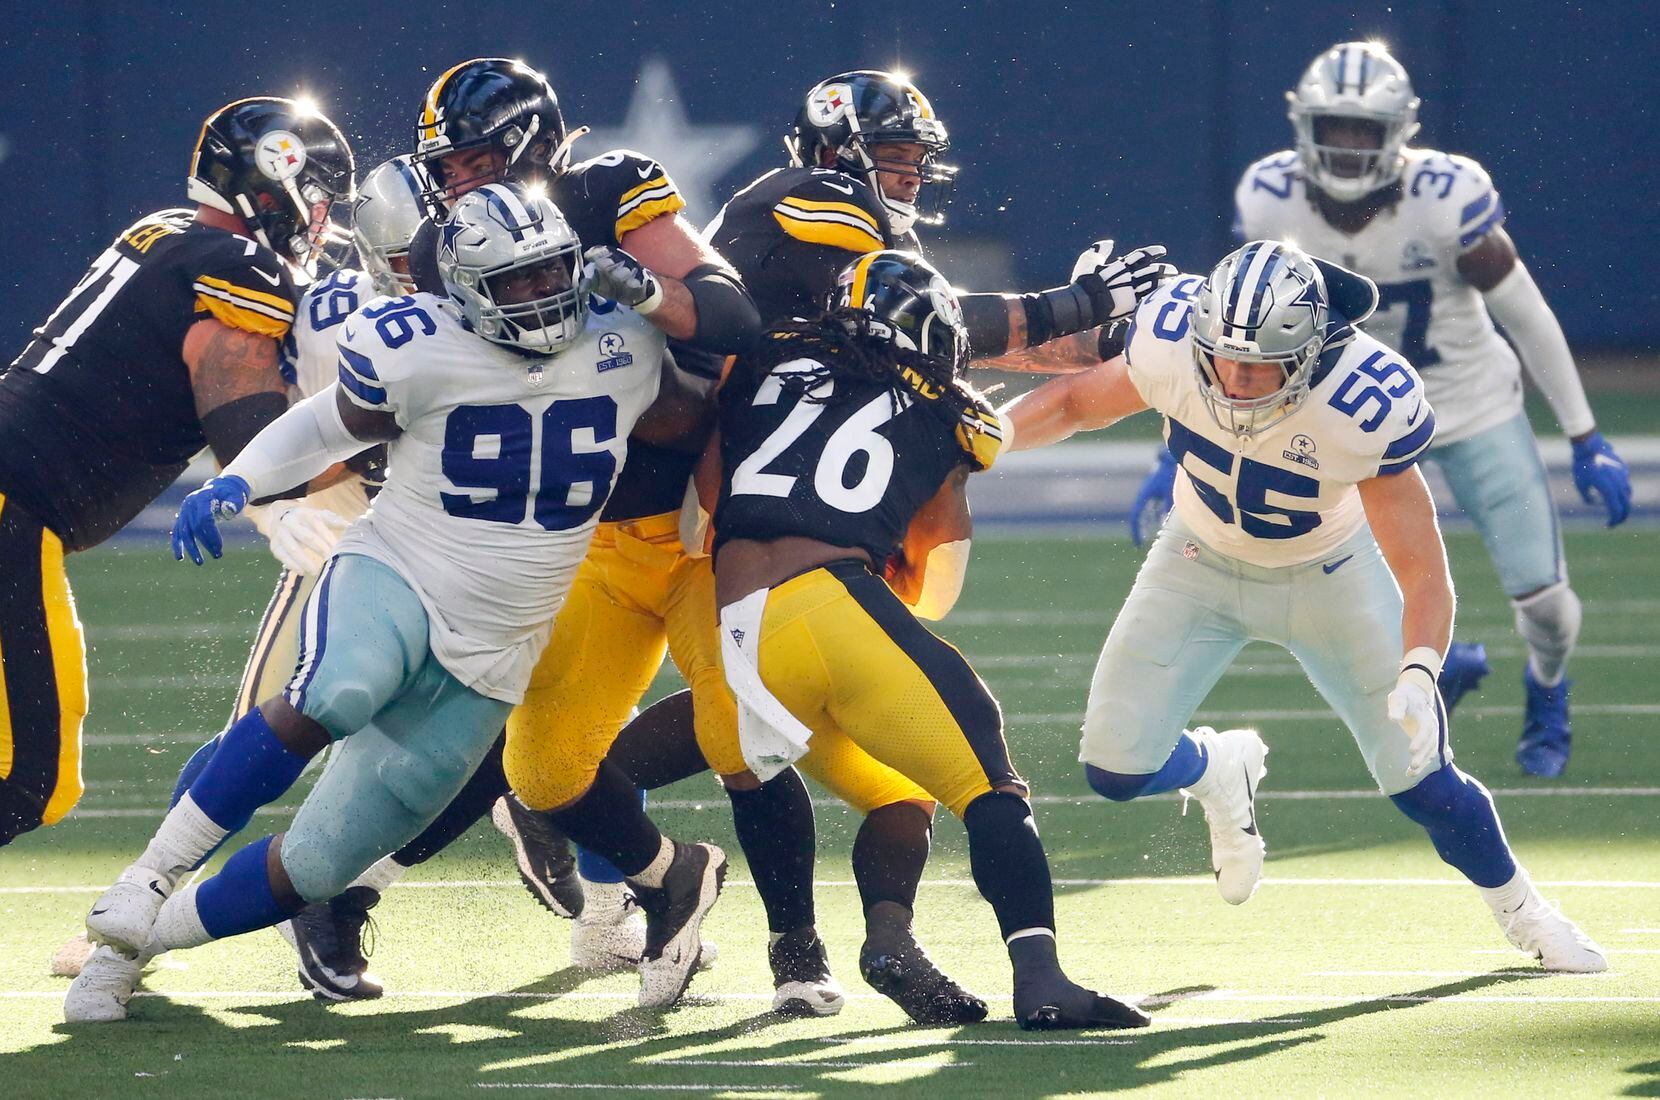 Dallas Cowboys defensive tackle Neville Gallimore (96) and Dallas Cowboys outside linebacker Leighton Vander Esch (55) stop a run attempt from Pittsburgh Steelers running back Anthony McFarland (26) during the second quarter of play at AT&T Stadium in Arlington, Texas on Sunday, November 8, 2020. (Vernon Bryant/The Dallas Morning News)